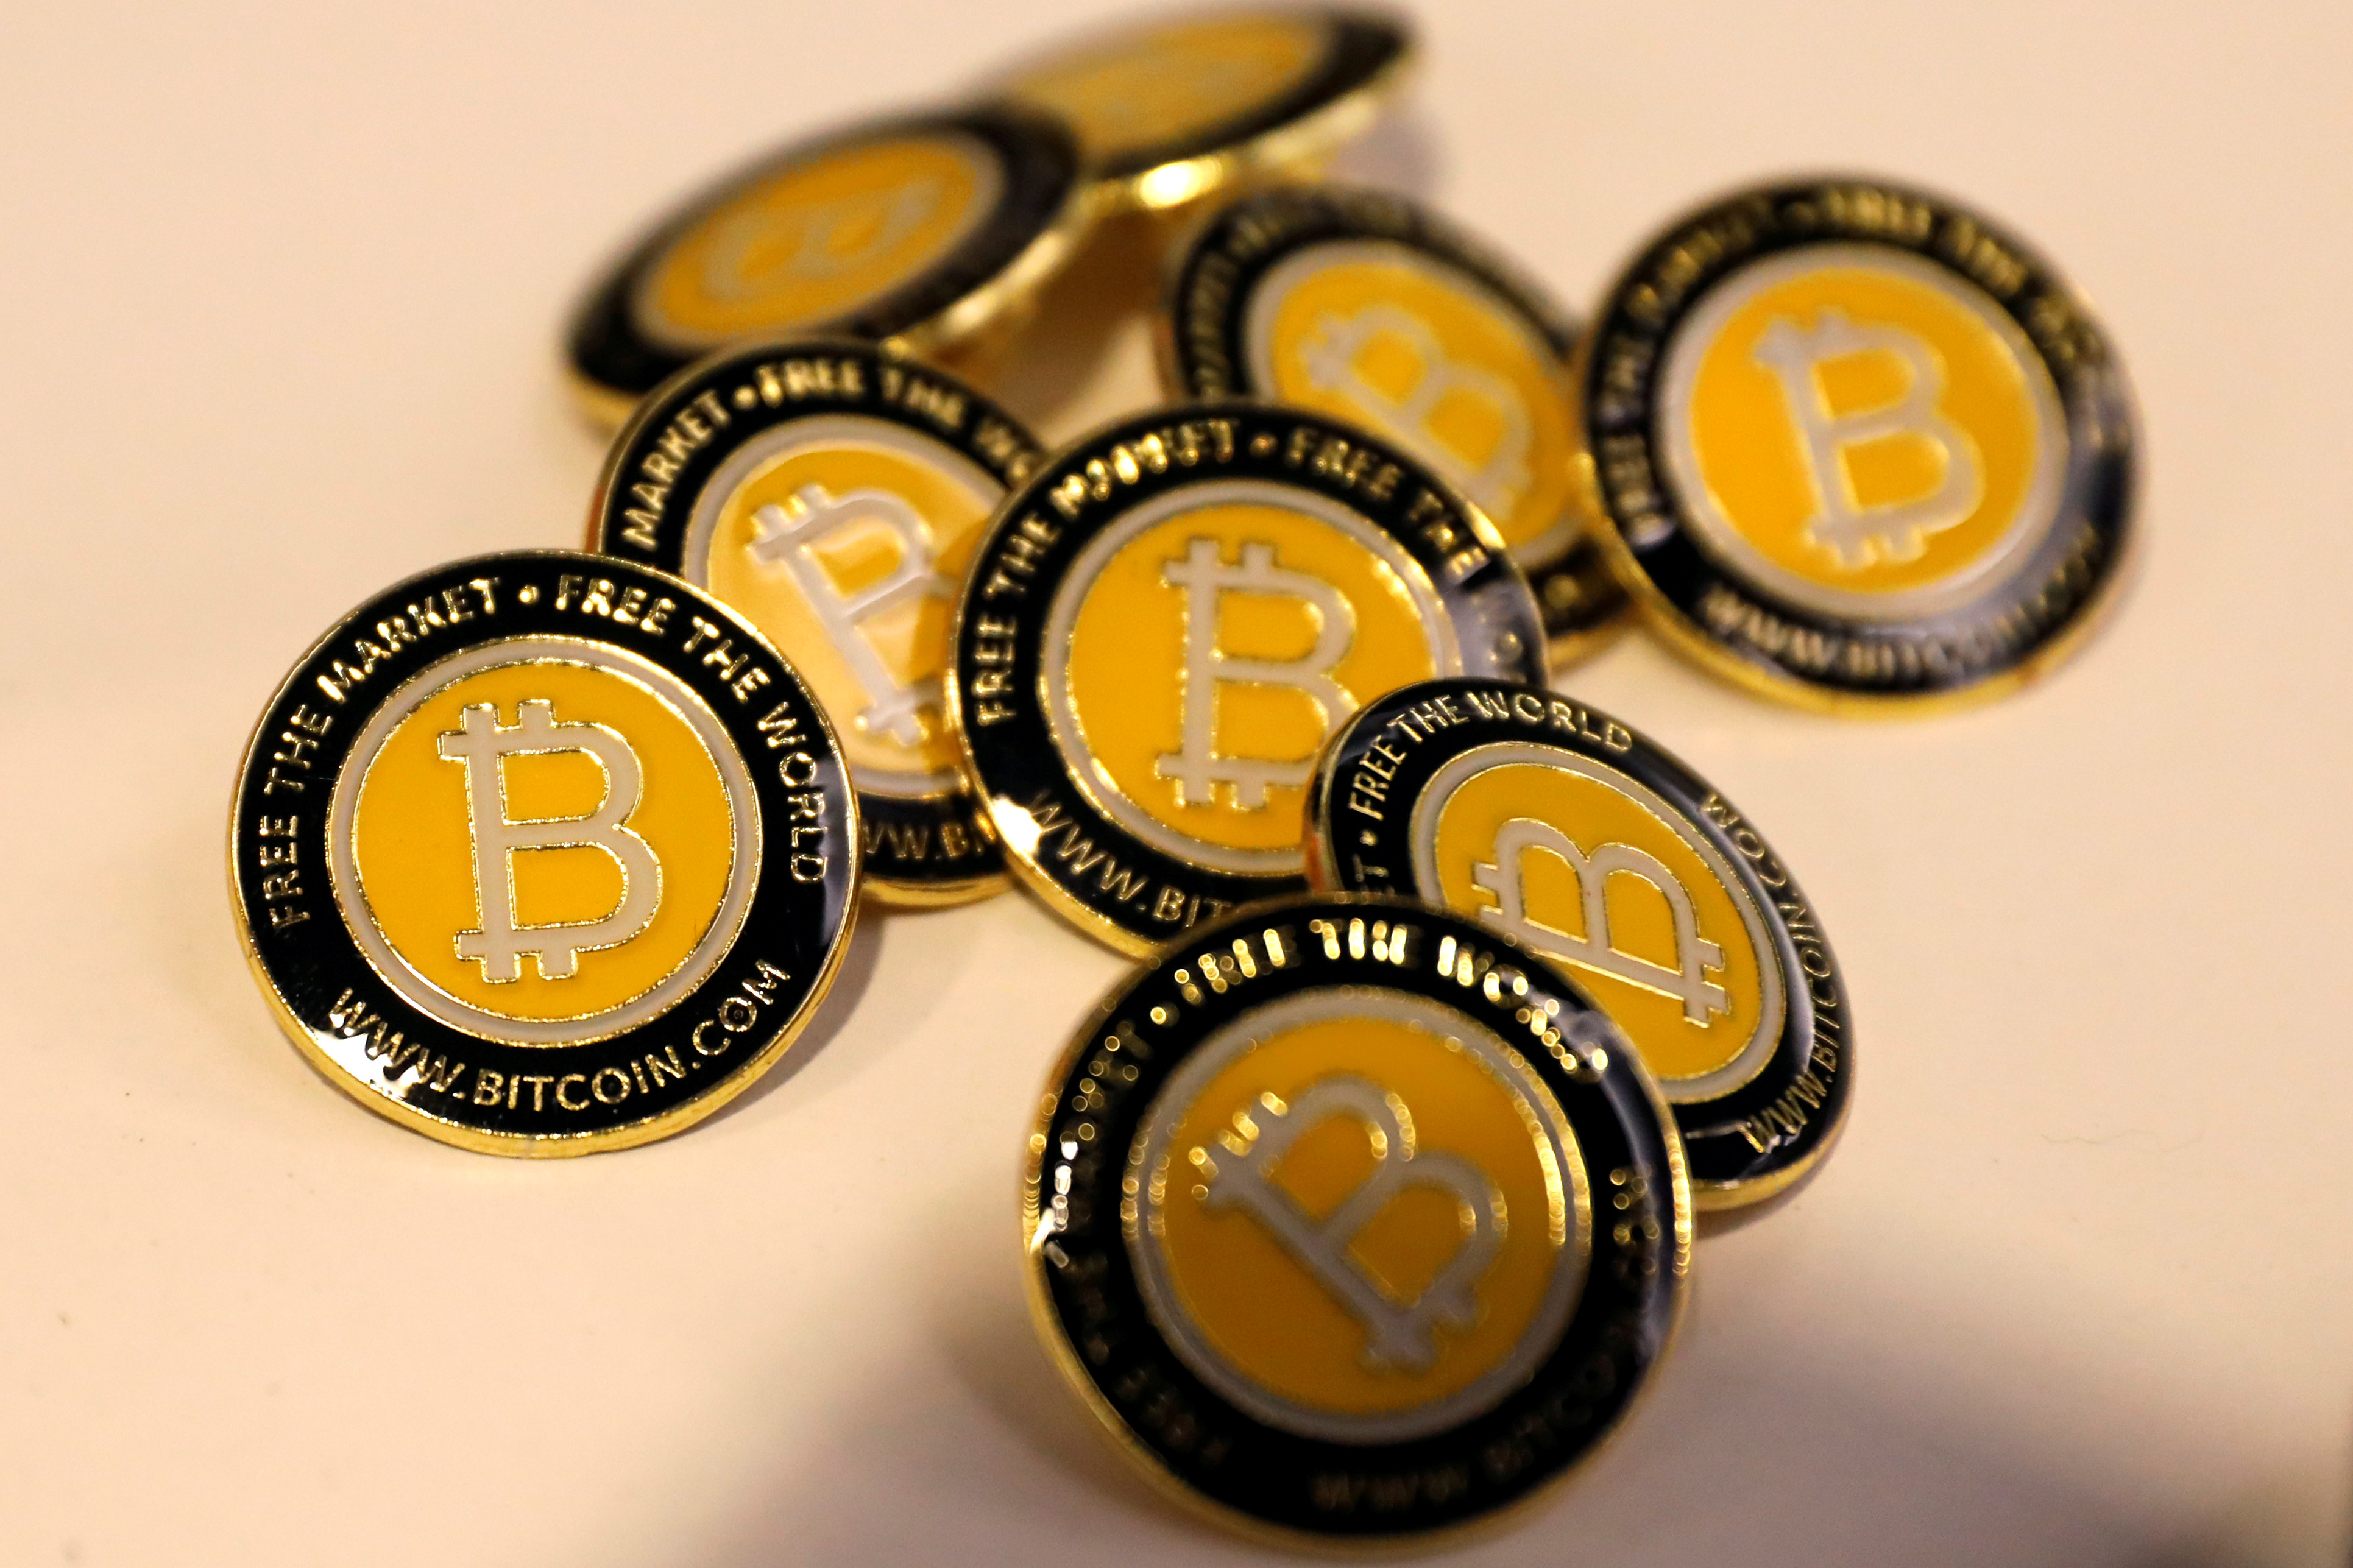 FILE - Bitcoin.com buttons are seen displayed on the floor of the Consensus 2018 blockchain technology conference in New York City, New York, U.S., May 16, 2018. REUTERS/Mike Segar/File Photo